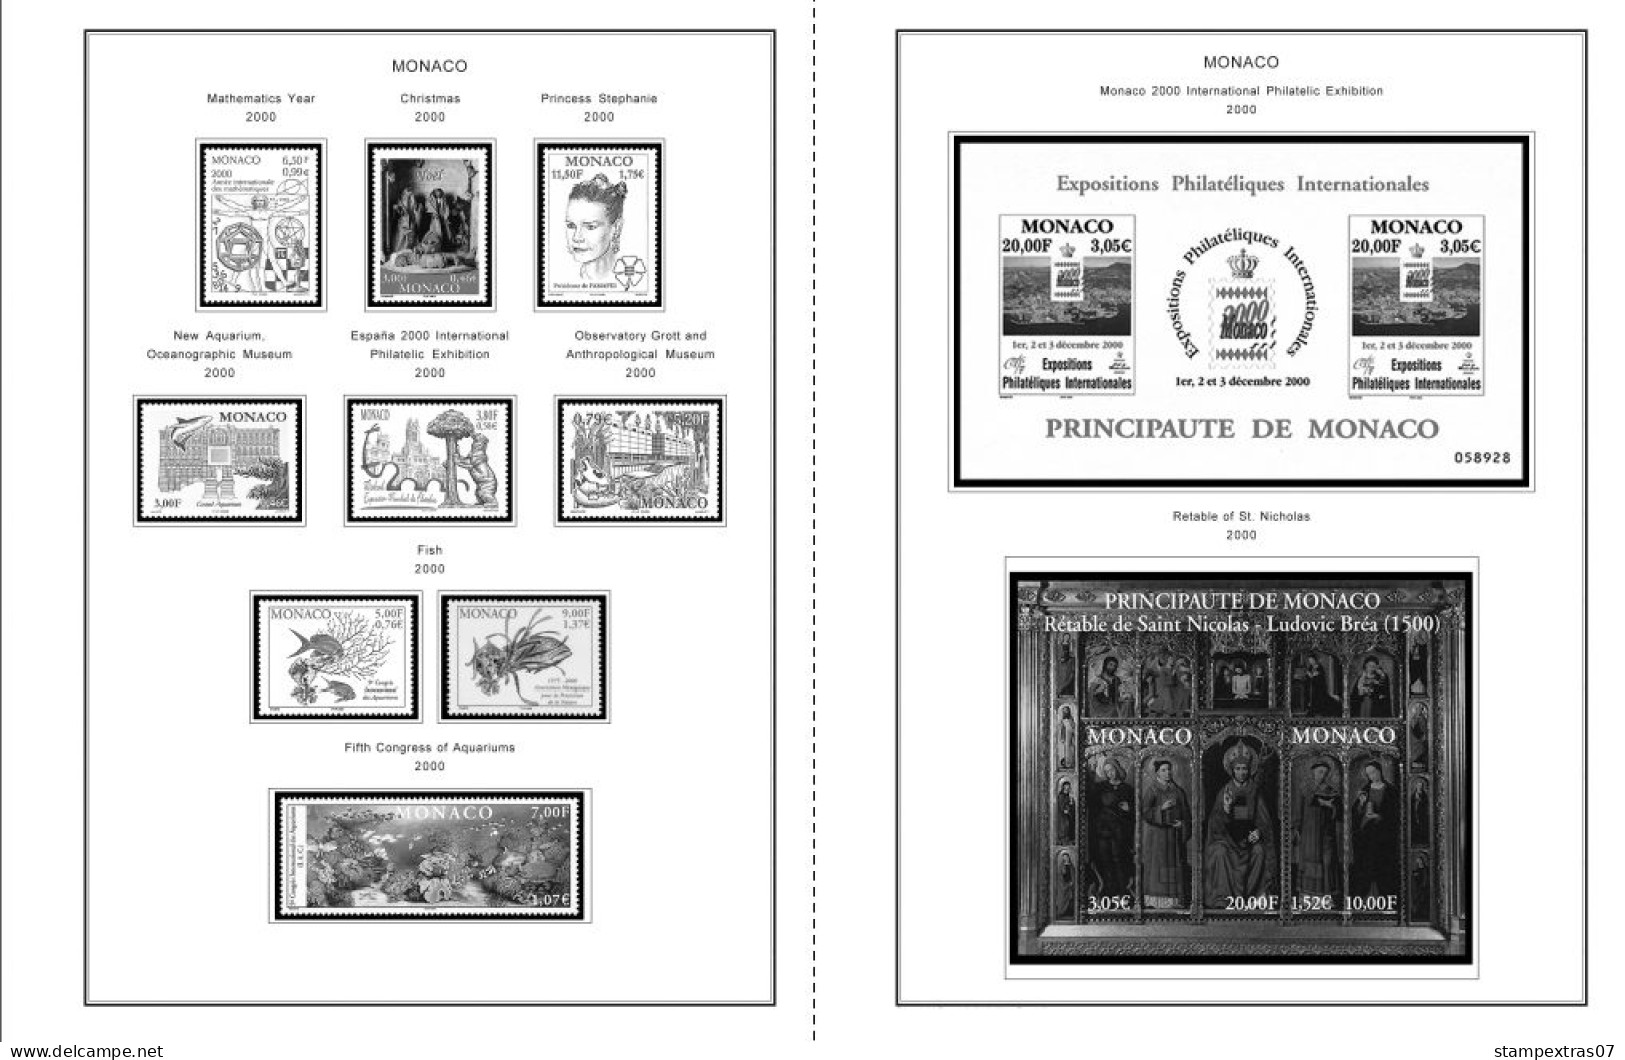 MONACO 1855-2010 + 2011-2020 STAMP ALBUM PAGES (409 B&w Illustrated Pages) - English